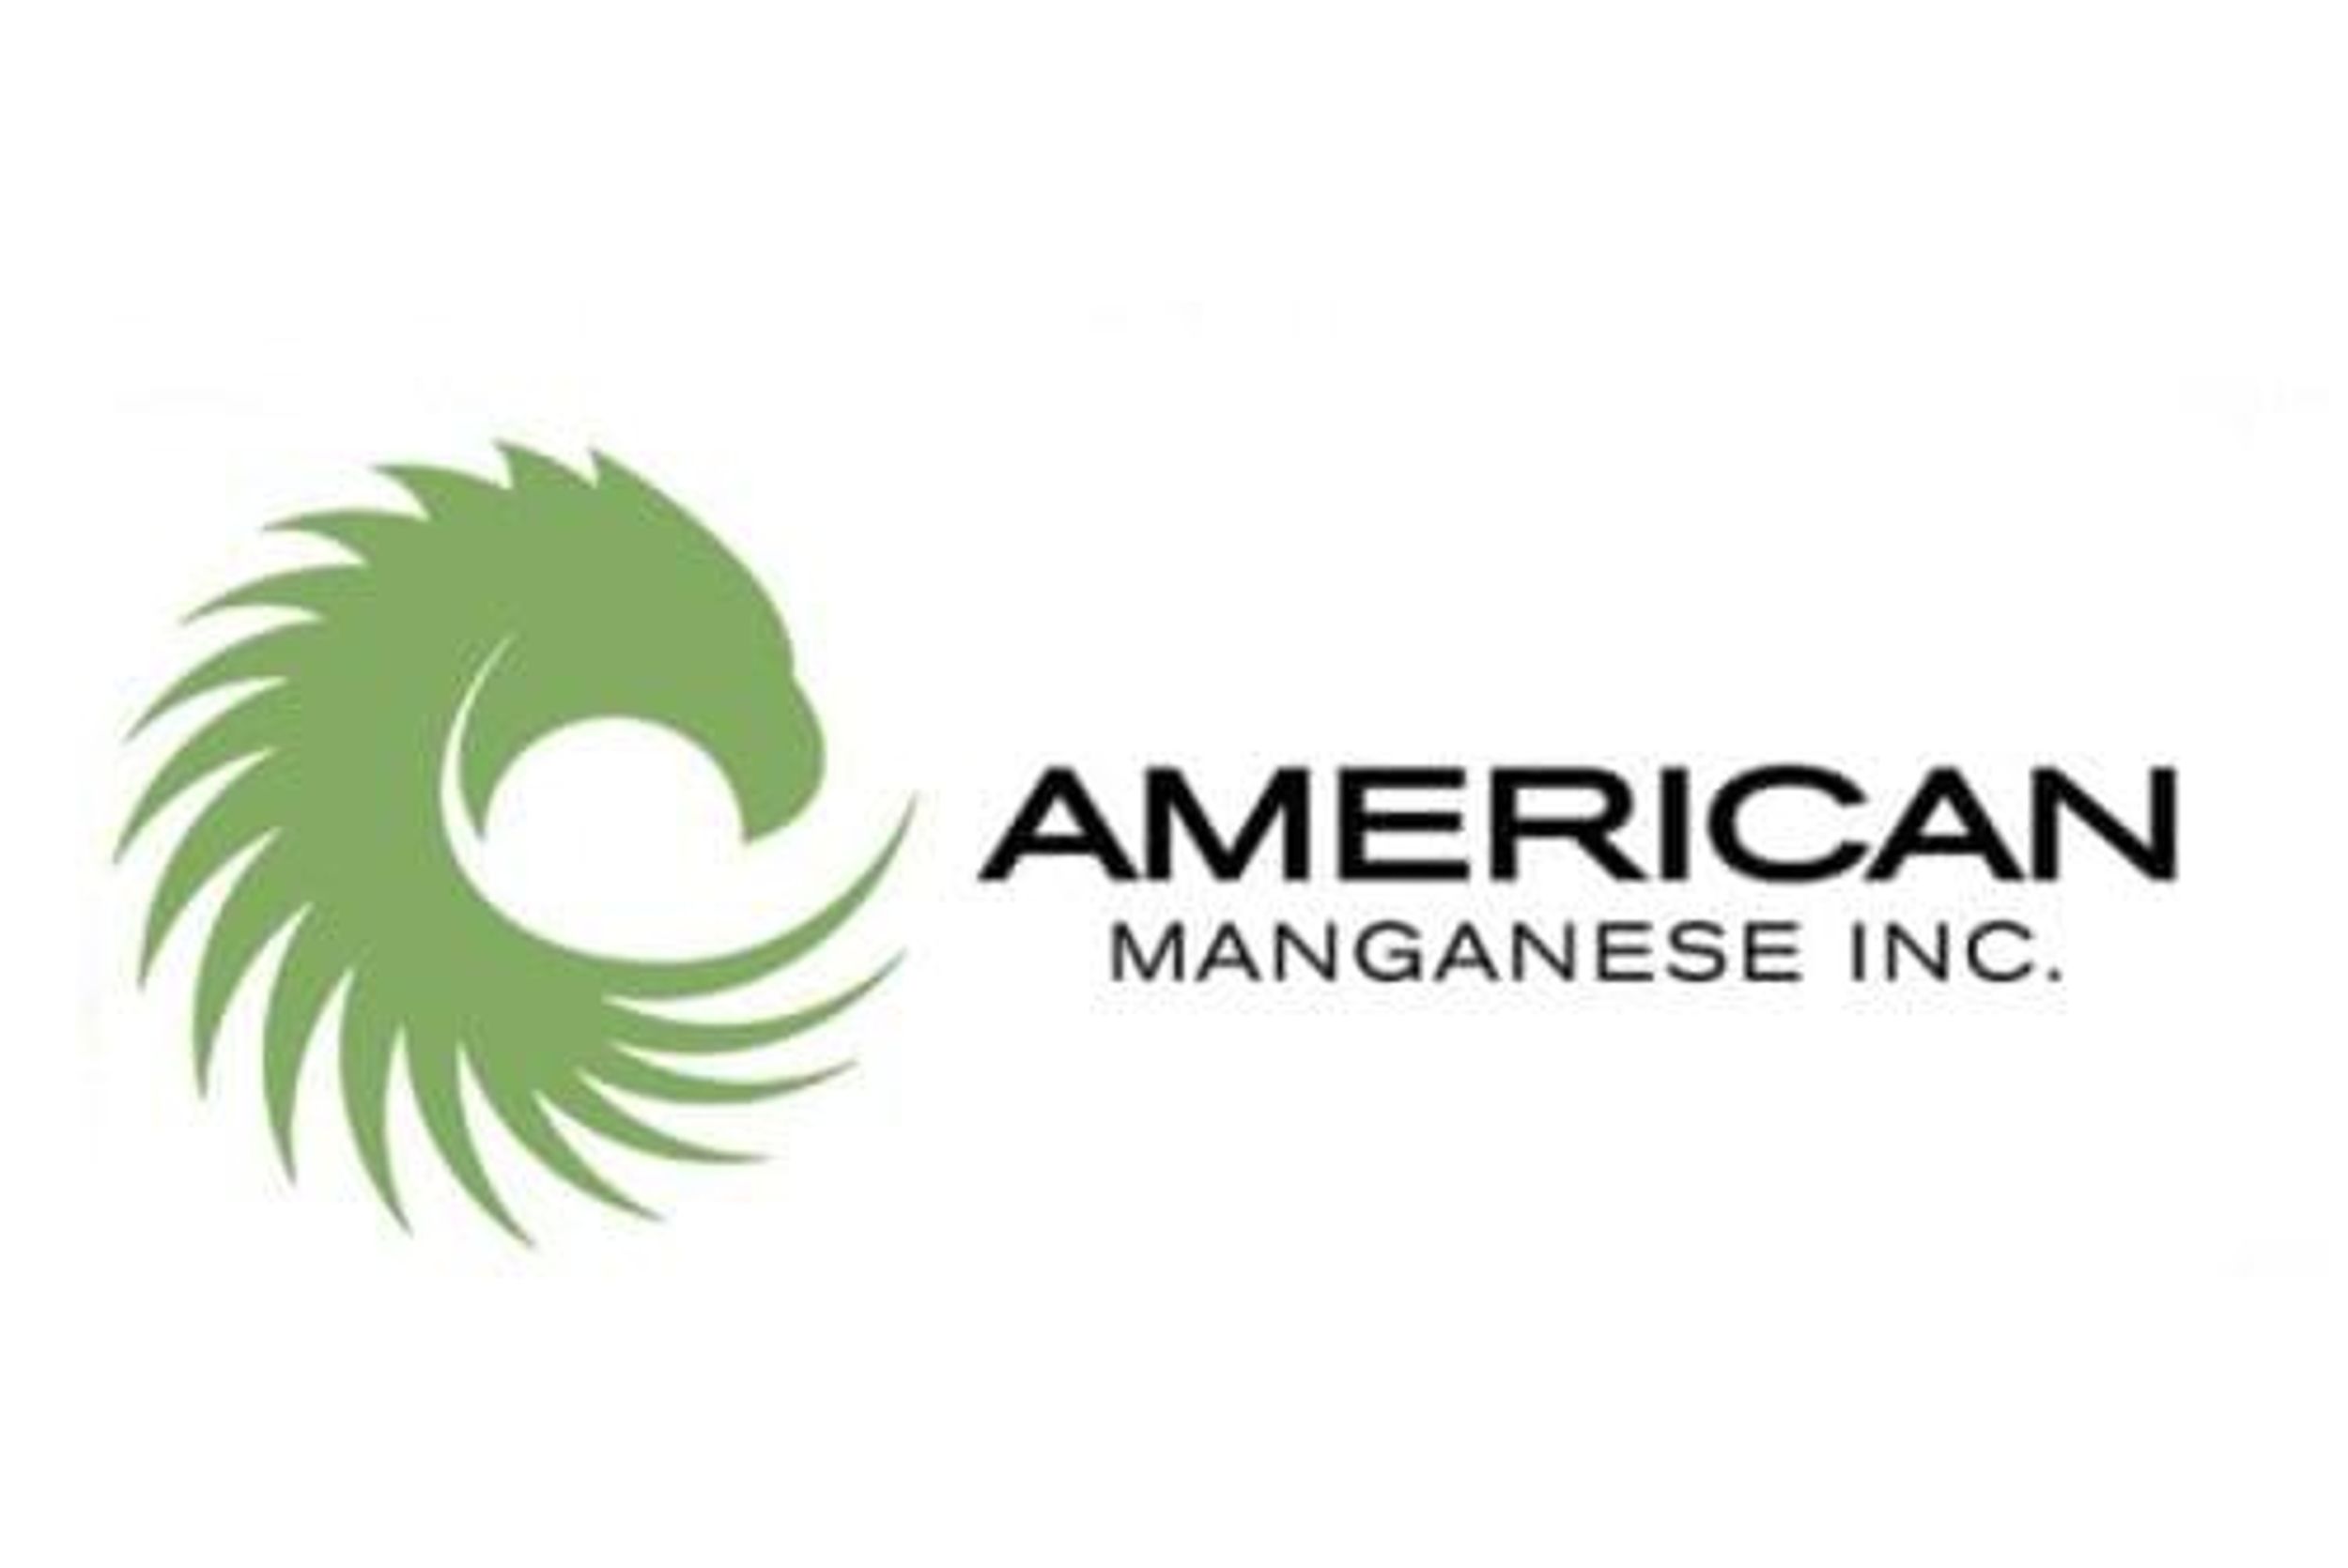 American Manganese Invited to Present at the Massachusetts Institute of Technology for Evonik's Battery Solutions Day